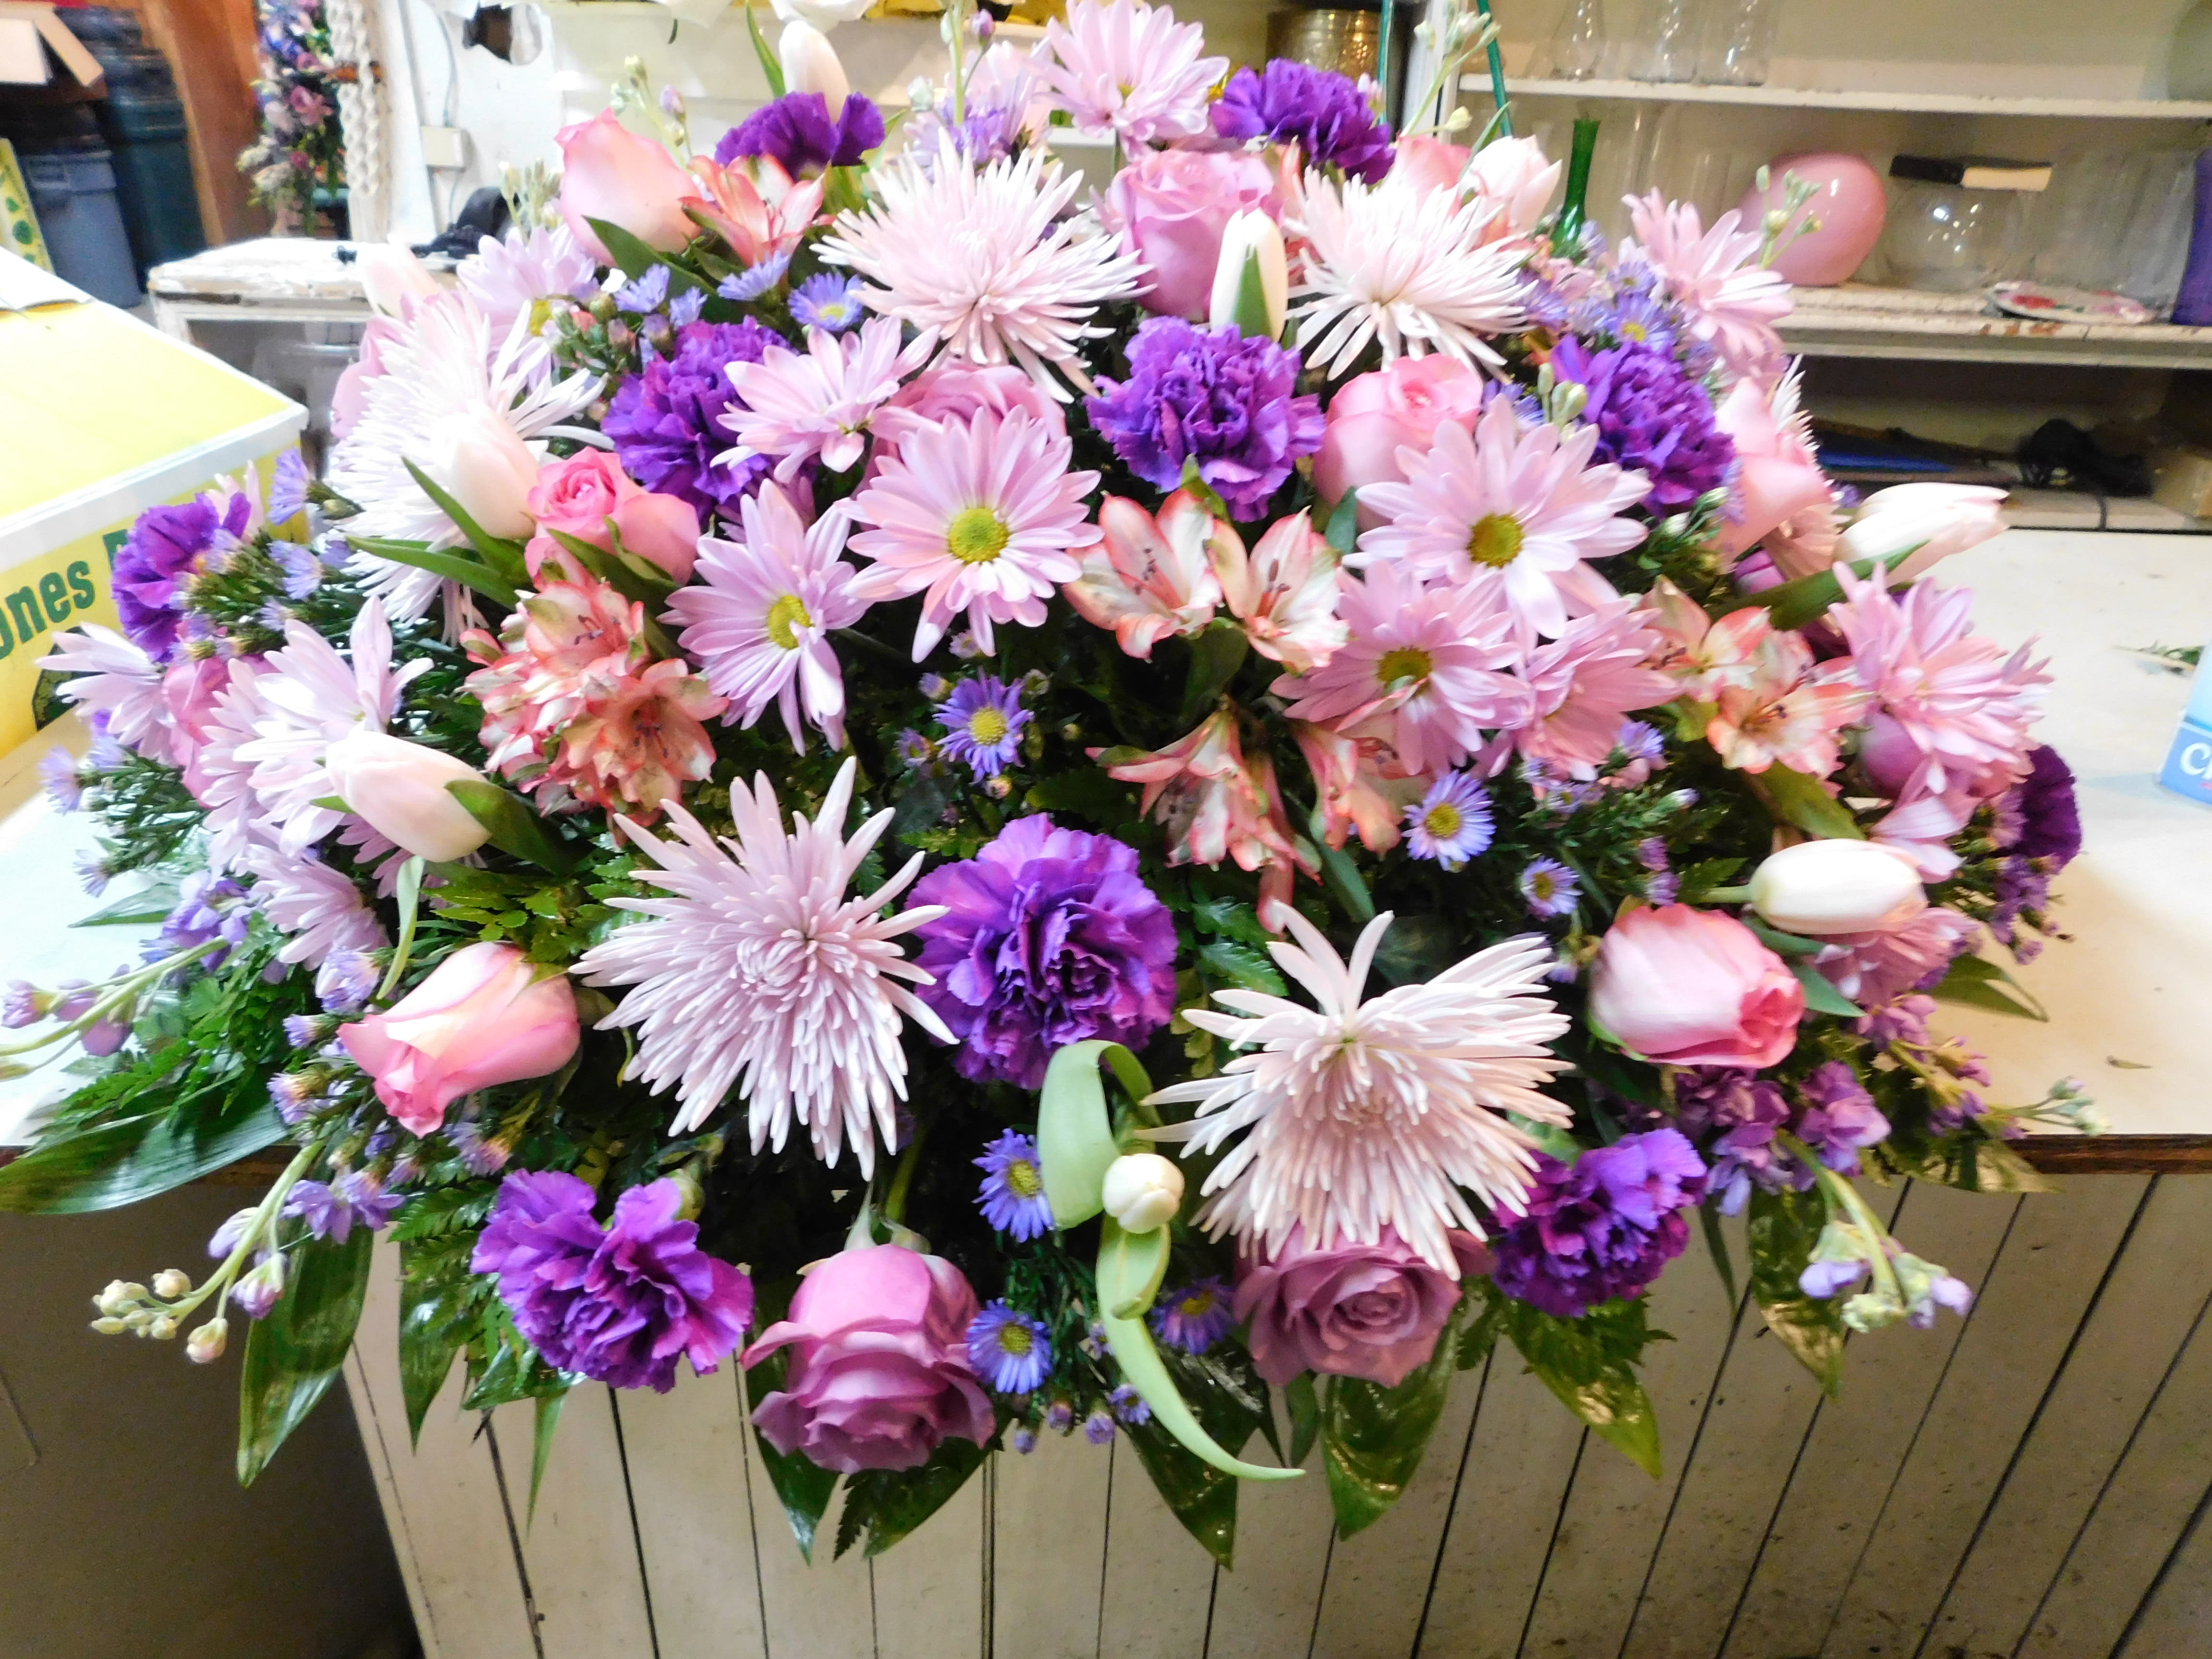 Pink and purple fushion - Lovely lavender and pink roses create this tribute that is overflowing with grace and love. Tulips, purple carnations, pink and lavender roses, white/pink tipped alstoemeria, and stock.